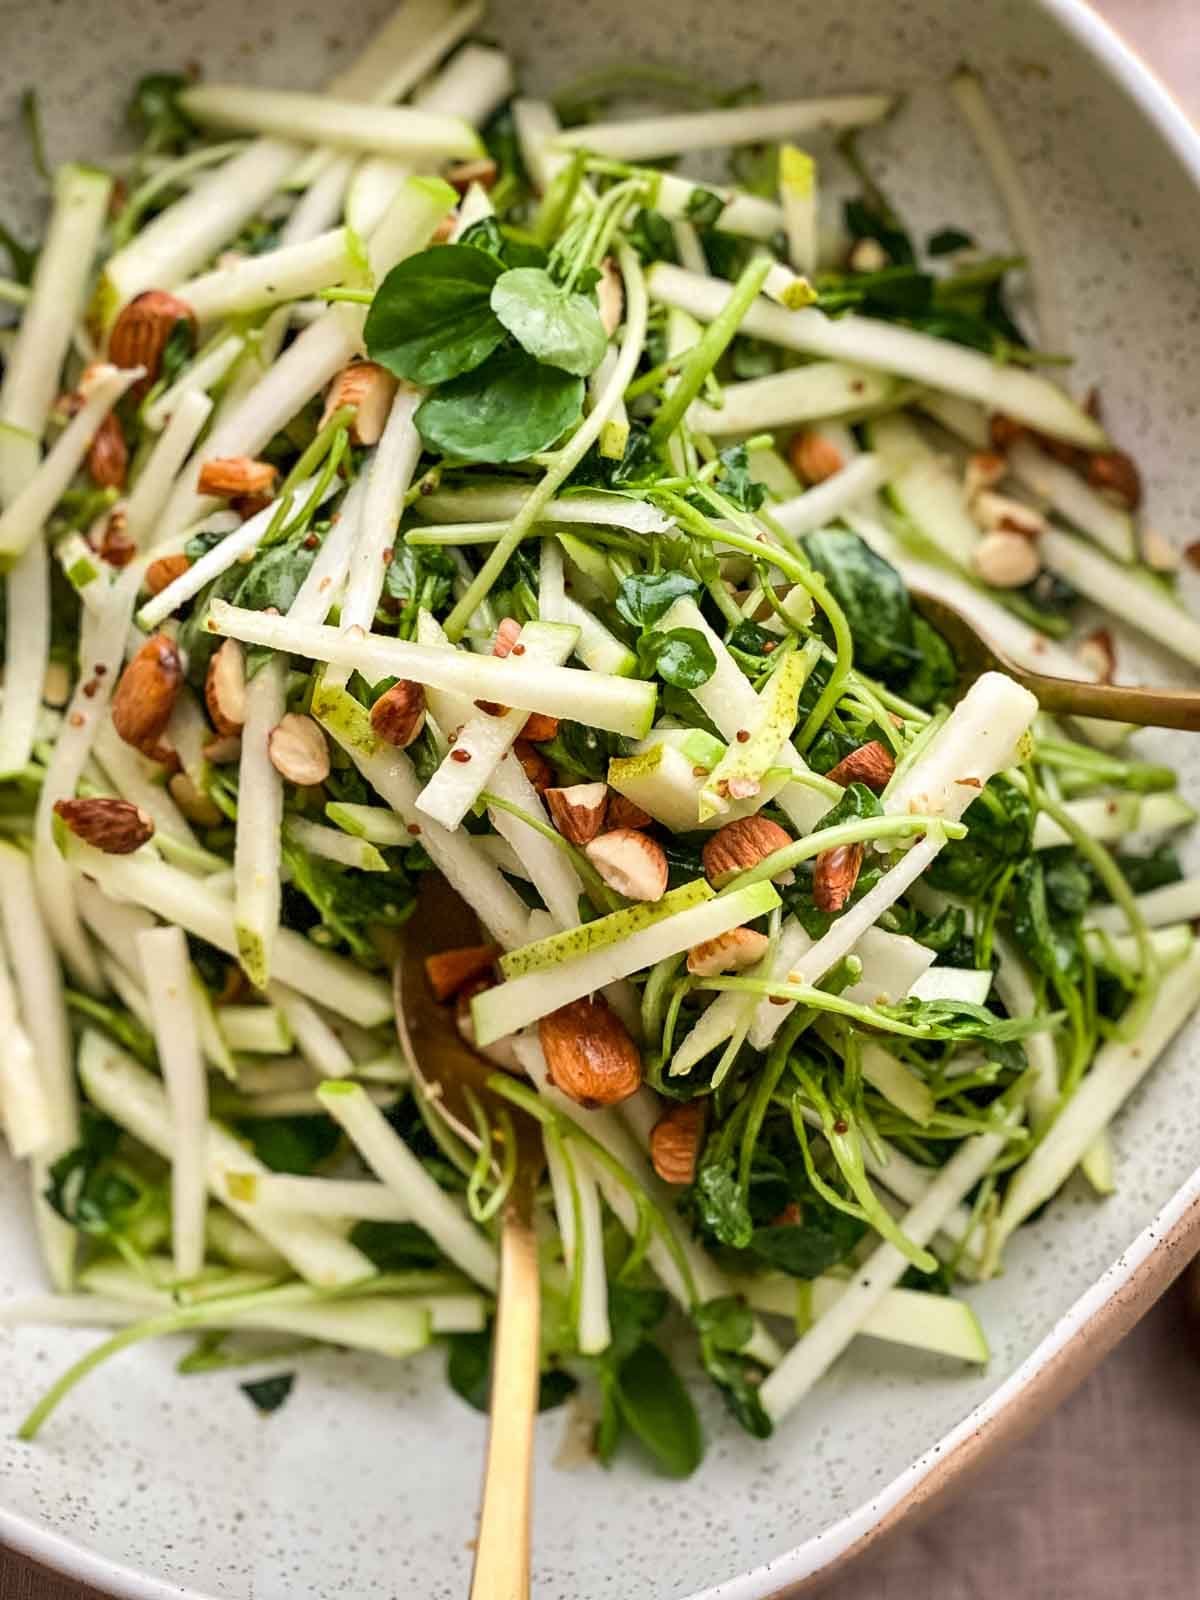 Watercress Salad with Almonds and Pears